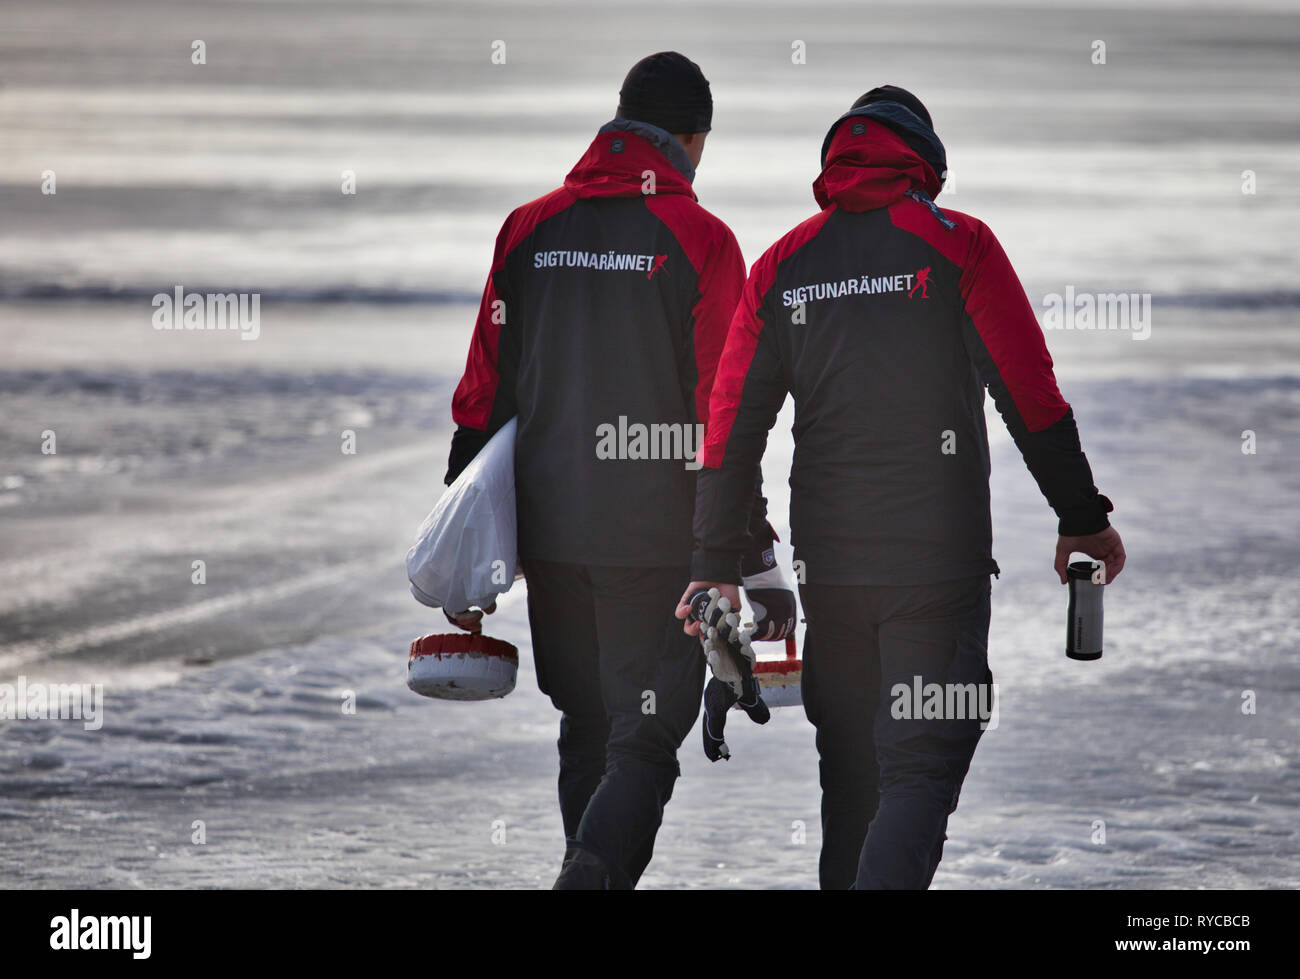 Two workers in branded Sigtunarannet clothing carrying metal curling stones at Sigtunarannet 2019, Lake Malaren, Sigtuna, Sweden, Scandinavia Stock Photo